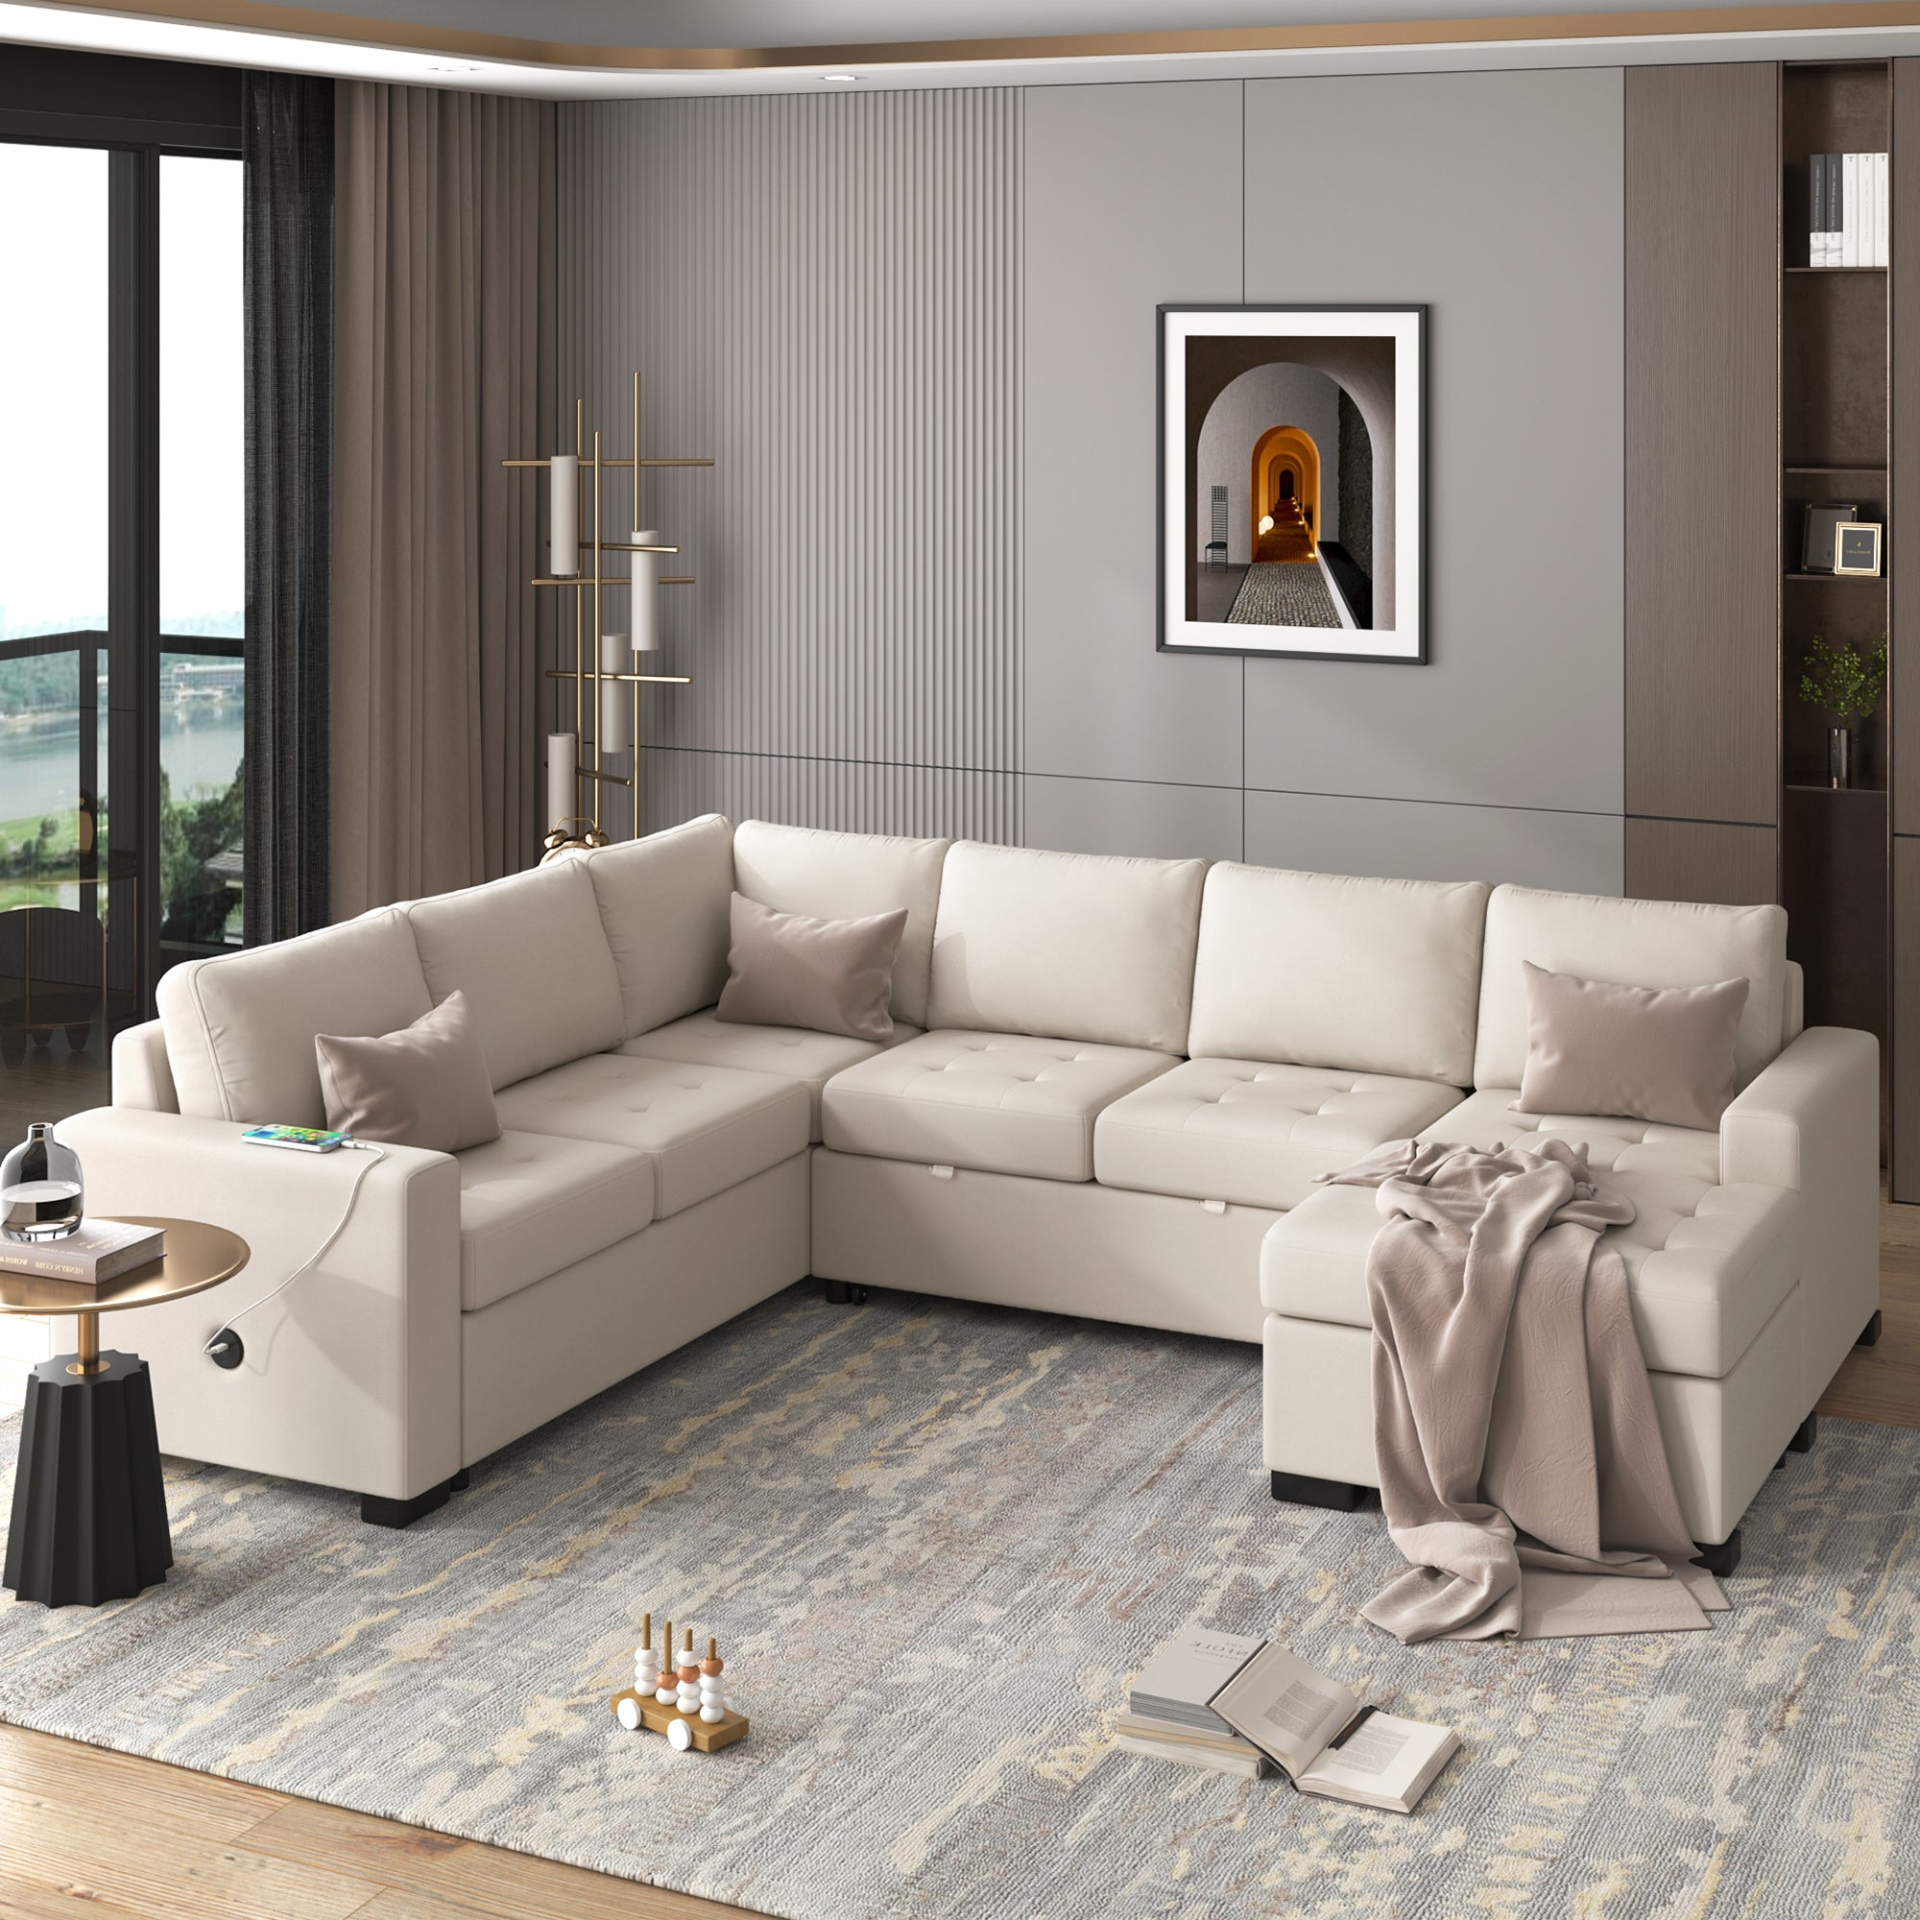 Beige - Contemporary L-Shaped Modular Sofa With USB & Type-C Interfaces